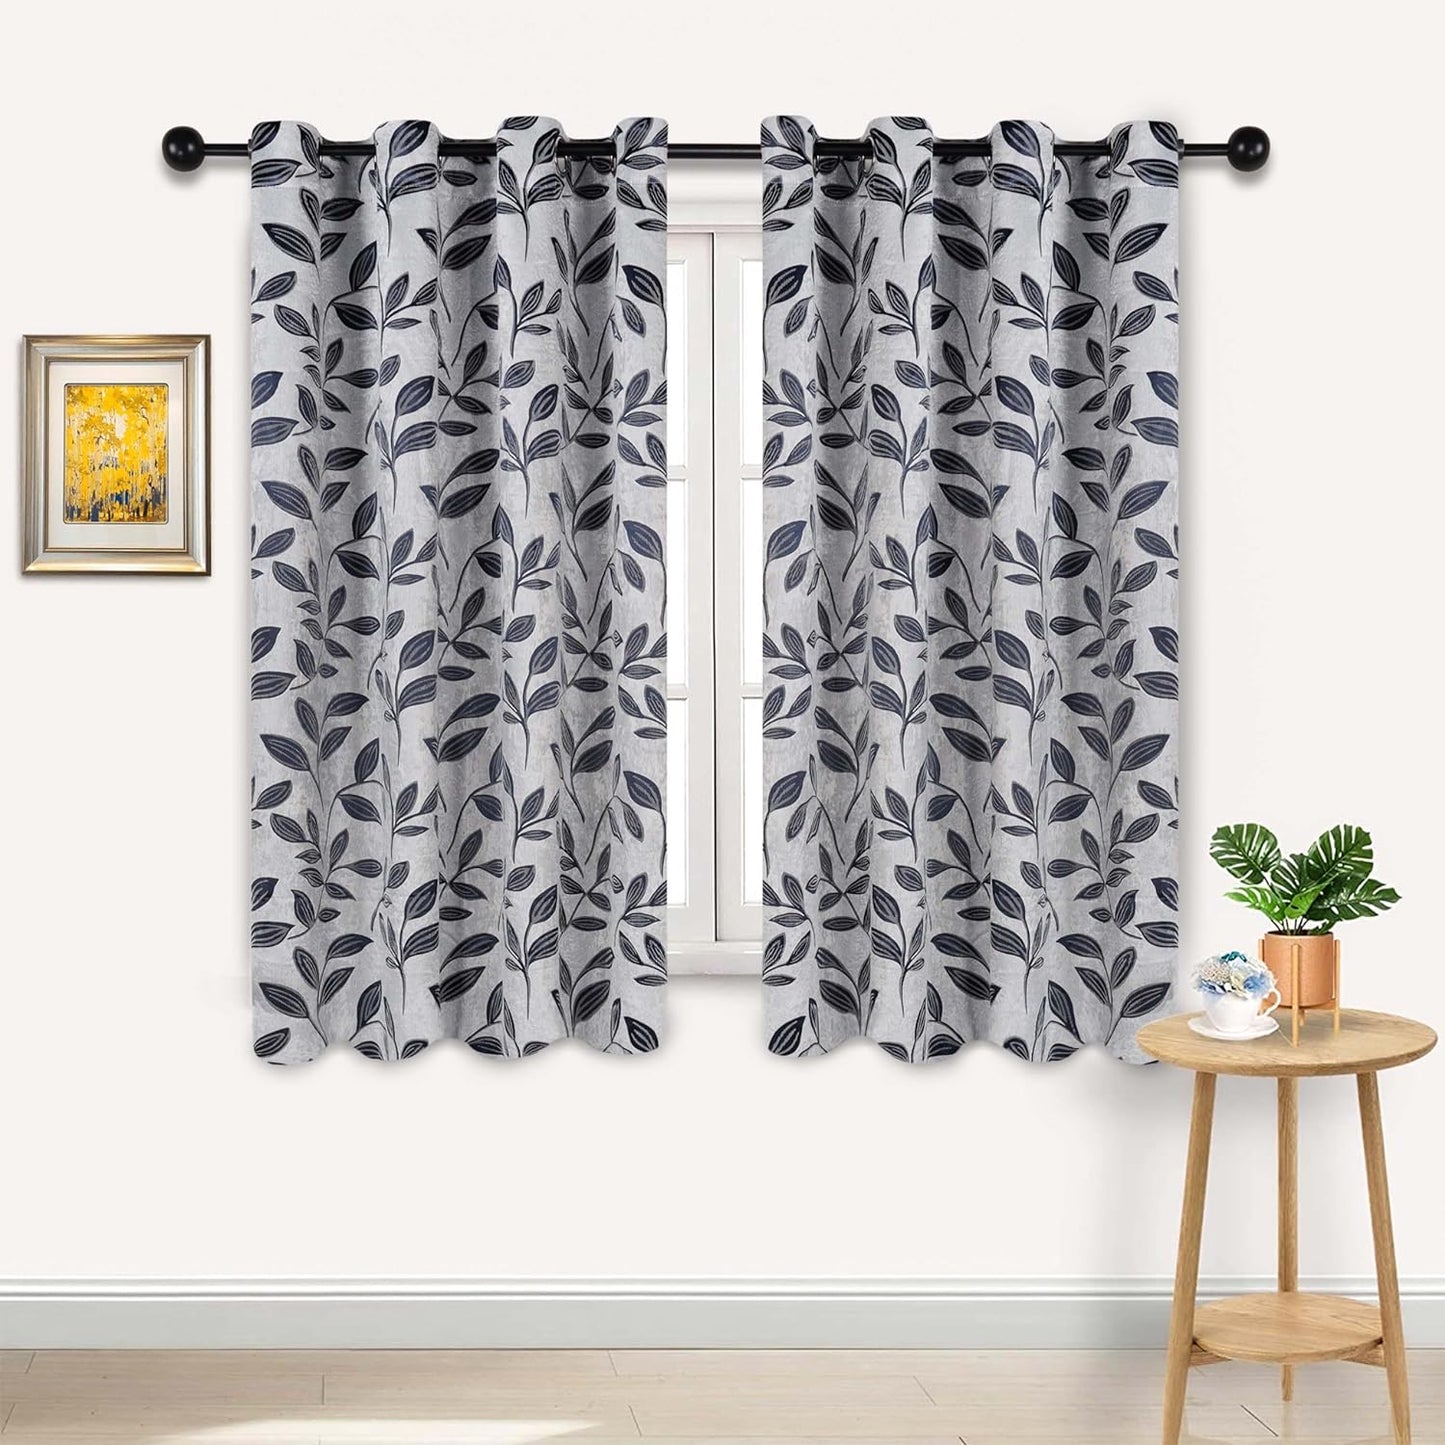 Superior Blackout Curtains, Room Darkening Window Accent for Bedroom, Sun Blocking, Thermal, Modern Bohemian Curtains, Leaves Collection, Set of 2 Panels, Rod Pocket - 52 in X 63 In, Nickel Black  Home City Inc. White-Navy Blue 52 In X 63 In (W X L) 